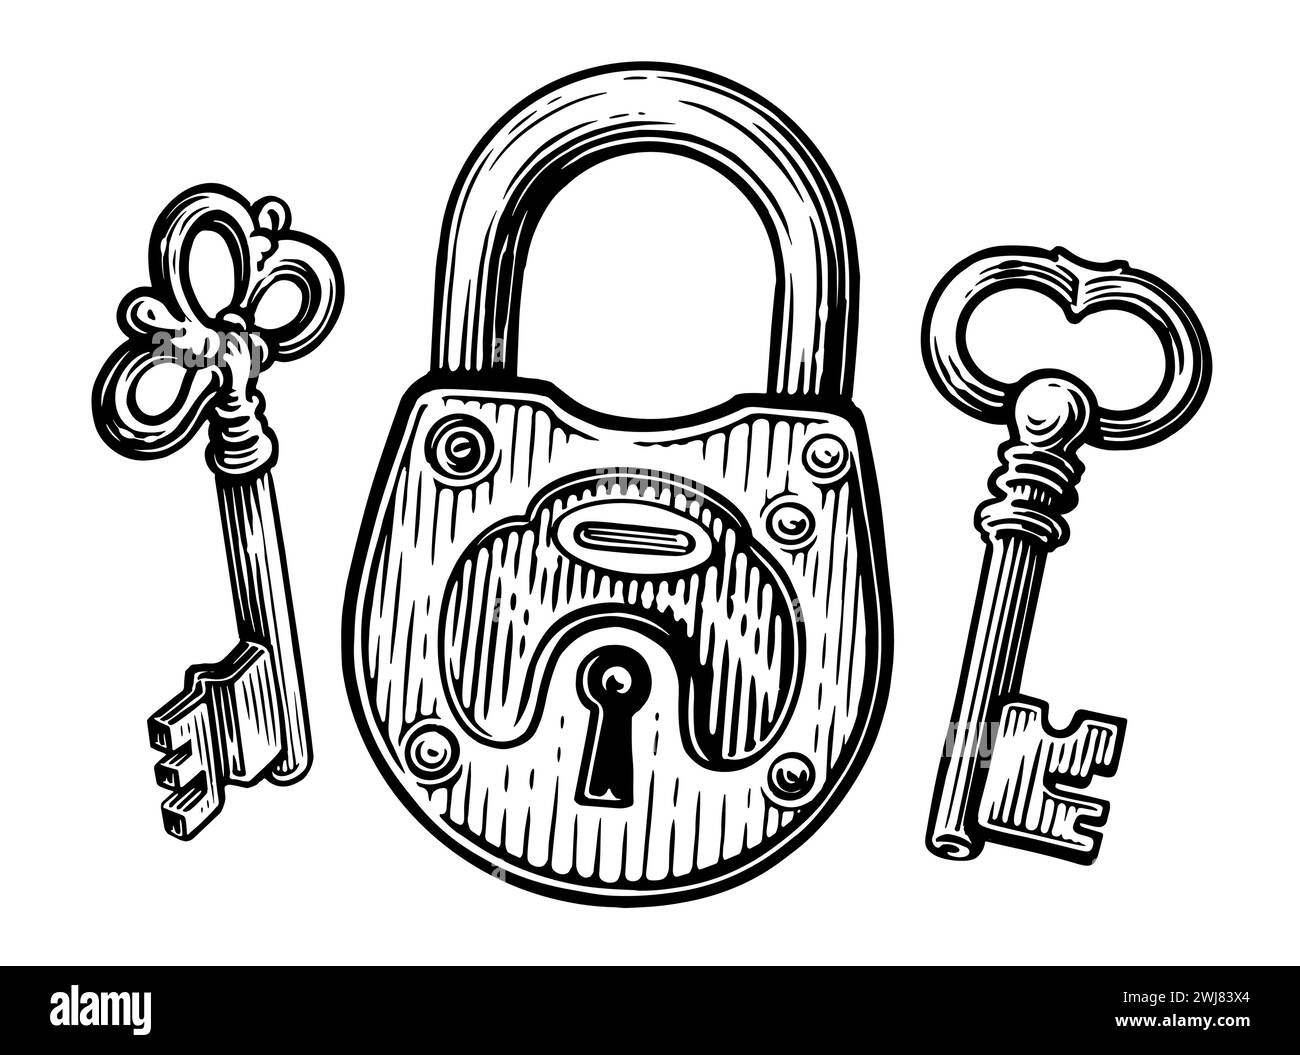 Padlock and keyhole. Closed lock with key. Hand drawn sketch vintage vector illustration Stock Vector